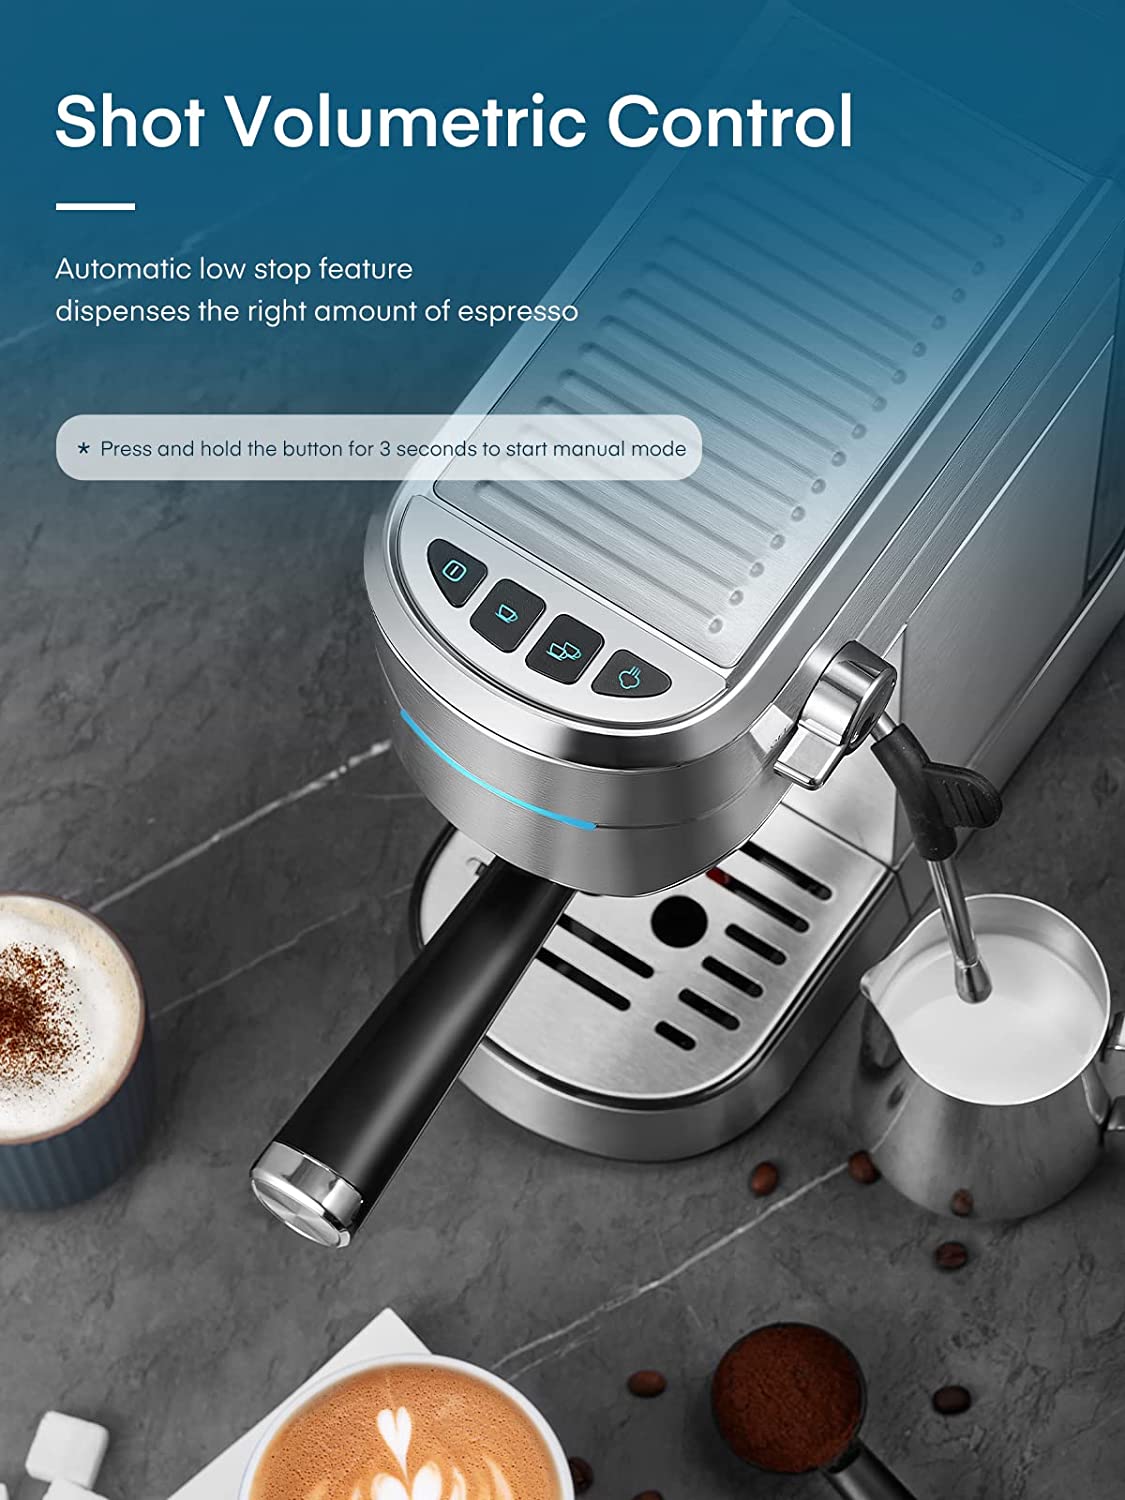 shot volmetric control, HOUSNAT Espresso Machine, 20 Bar Espresso and Cappuccino Maker with Milk Frother Steam Wand, Professional Espresso Coffee Machine for Cappuccino and Latte, Compact Design, Brushed Stainless Steel